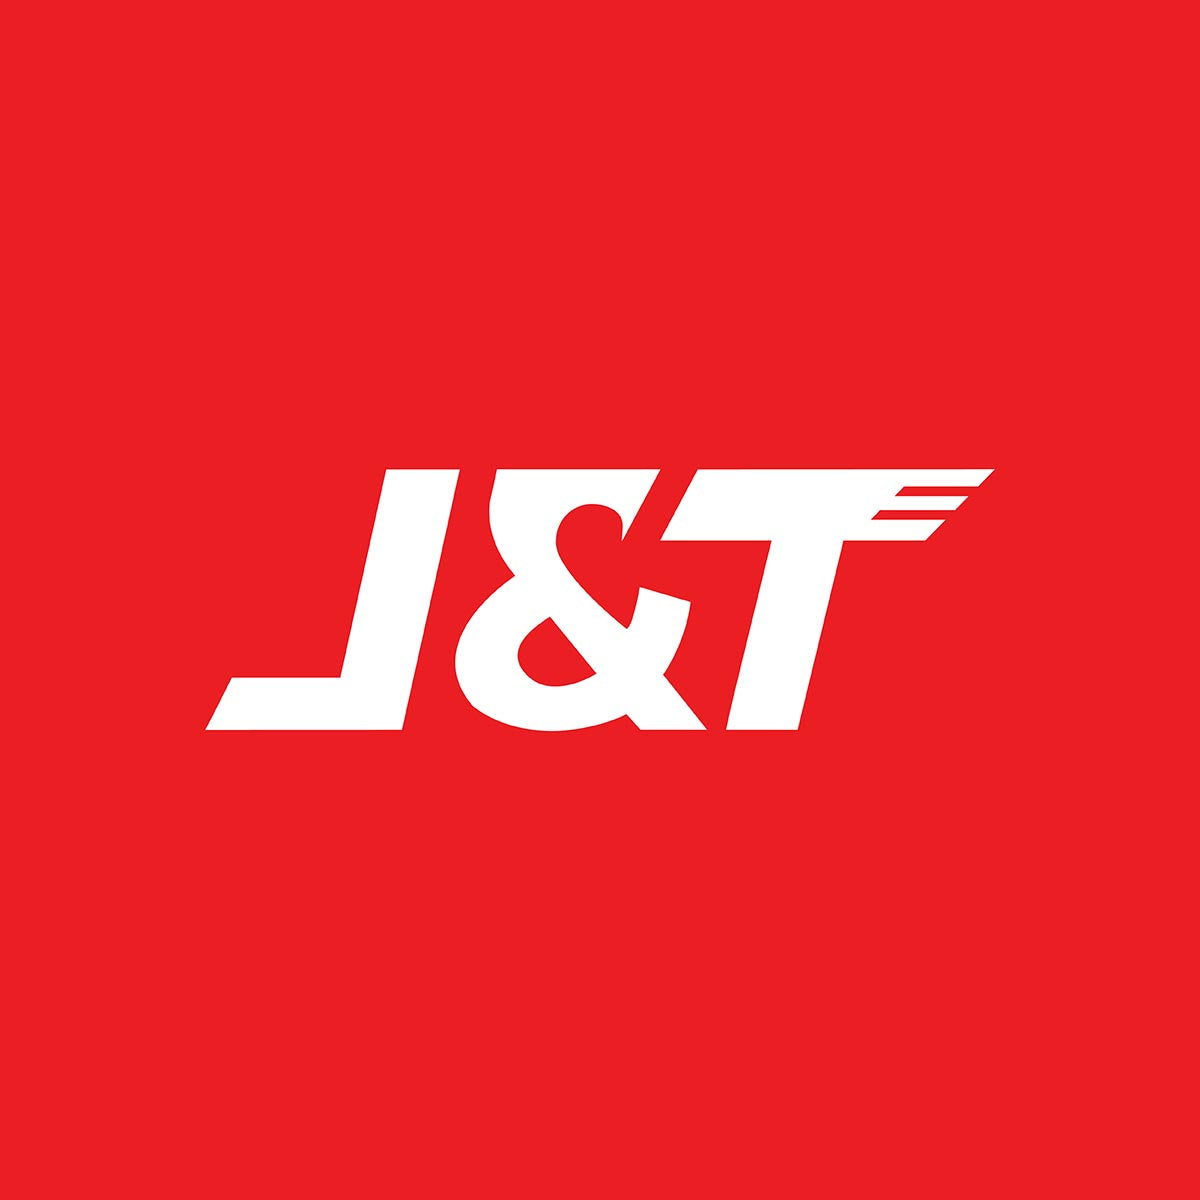 J&T Express Malaysia for Shopify